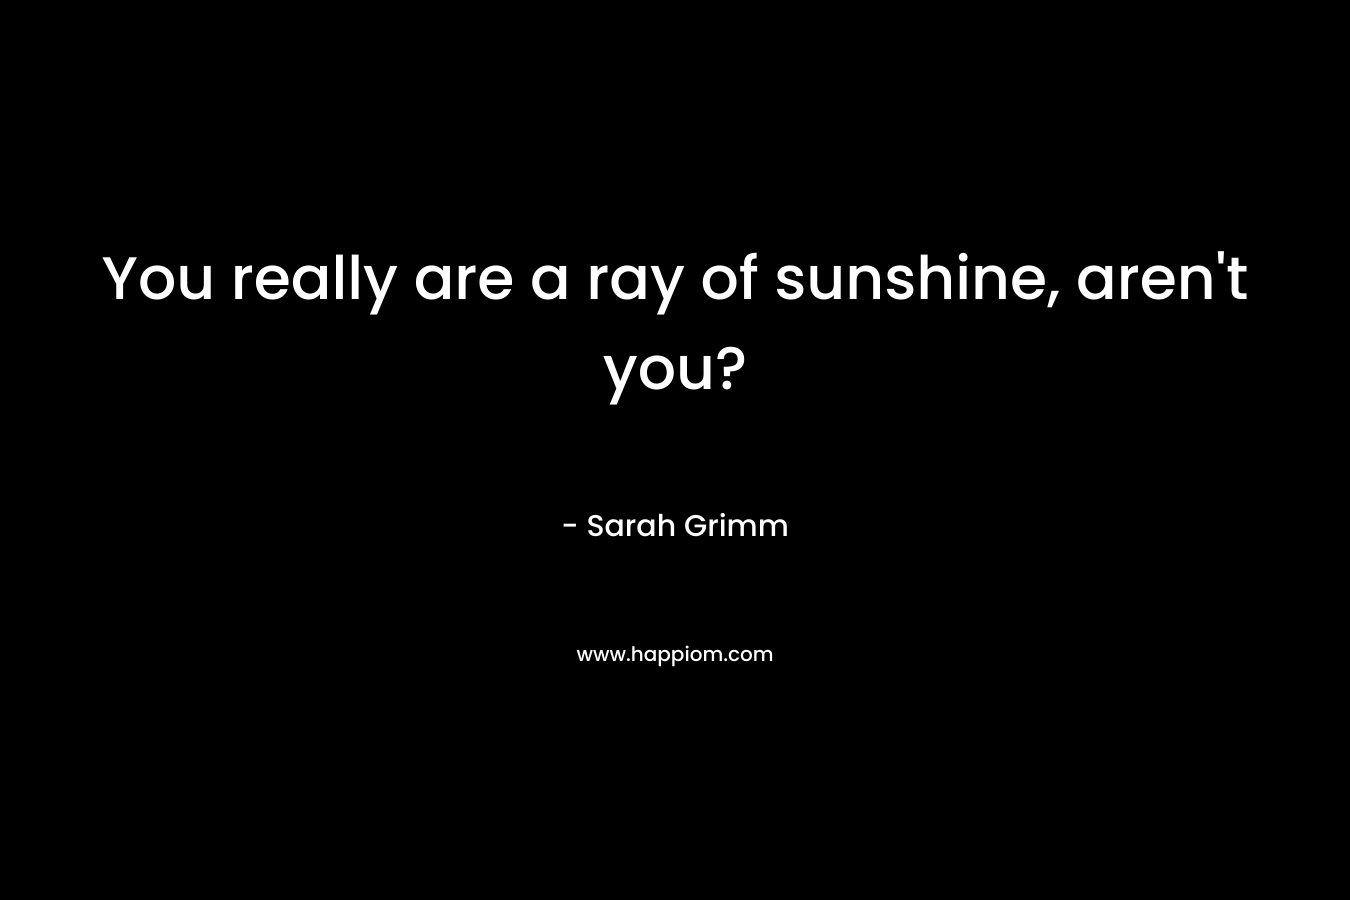 You really are a ray of sunshine, aren't you?